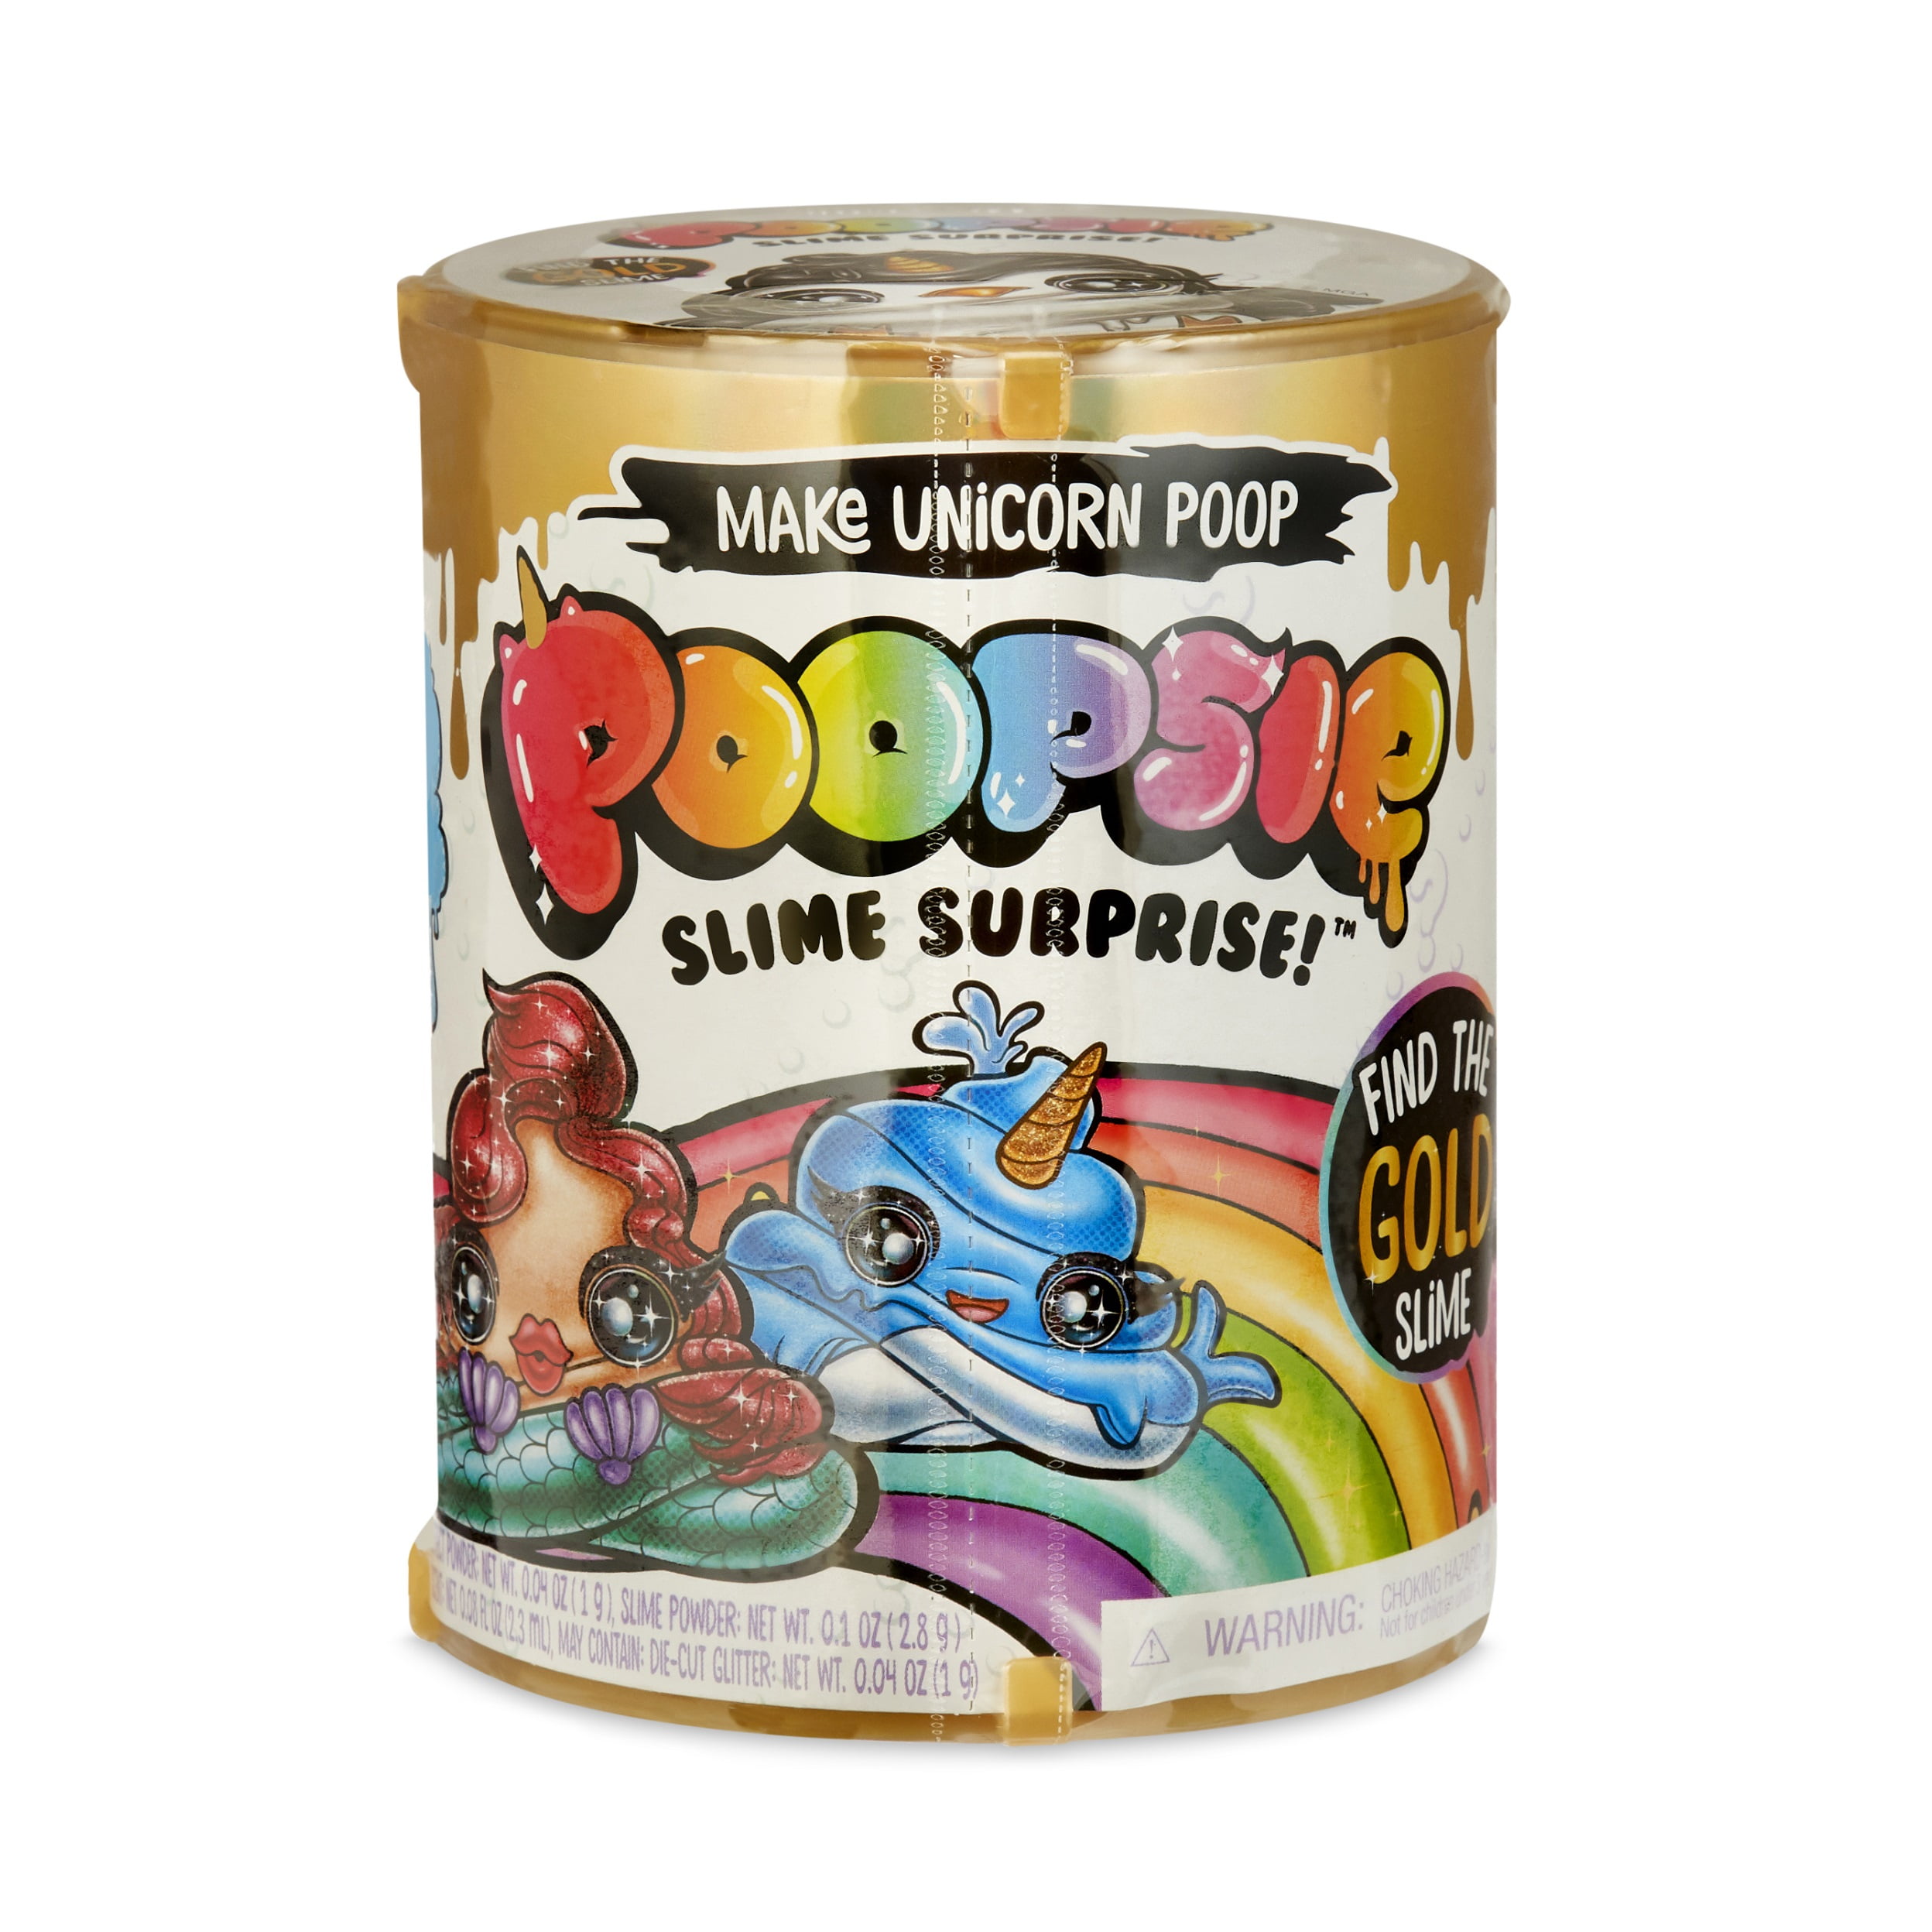 Glittery Metallic Unicorn Poop for Girls and Boys E=mc2 AbbyRose Unicorn Slime Poop 12 Pack Galaxy Putty Cool Party Supplies Mr Poo Gifts for Kids Learning Toys 4 You